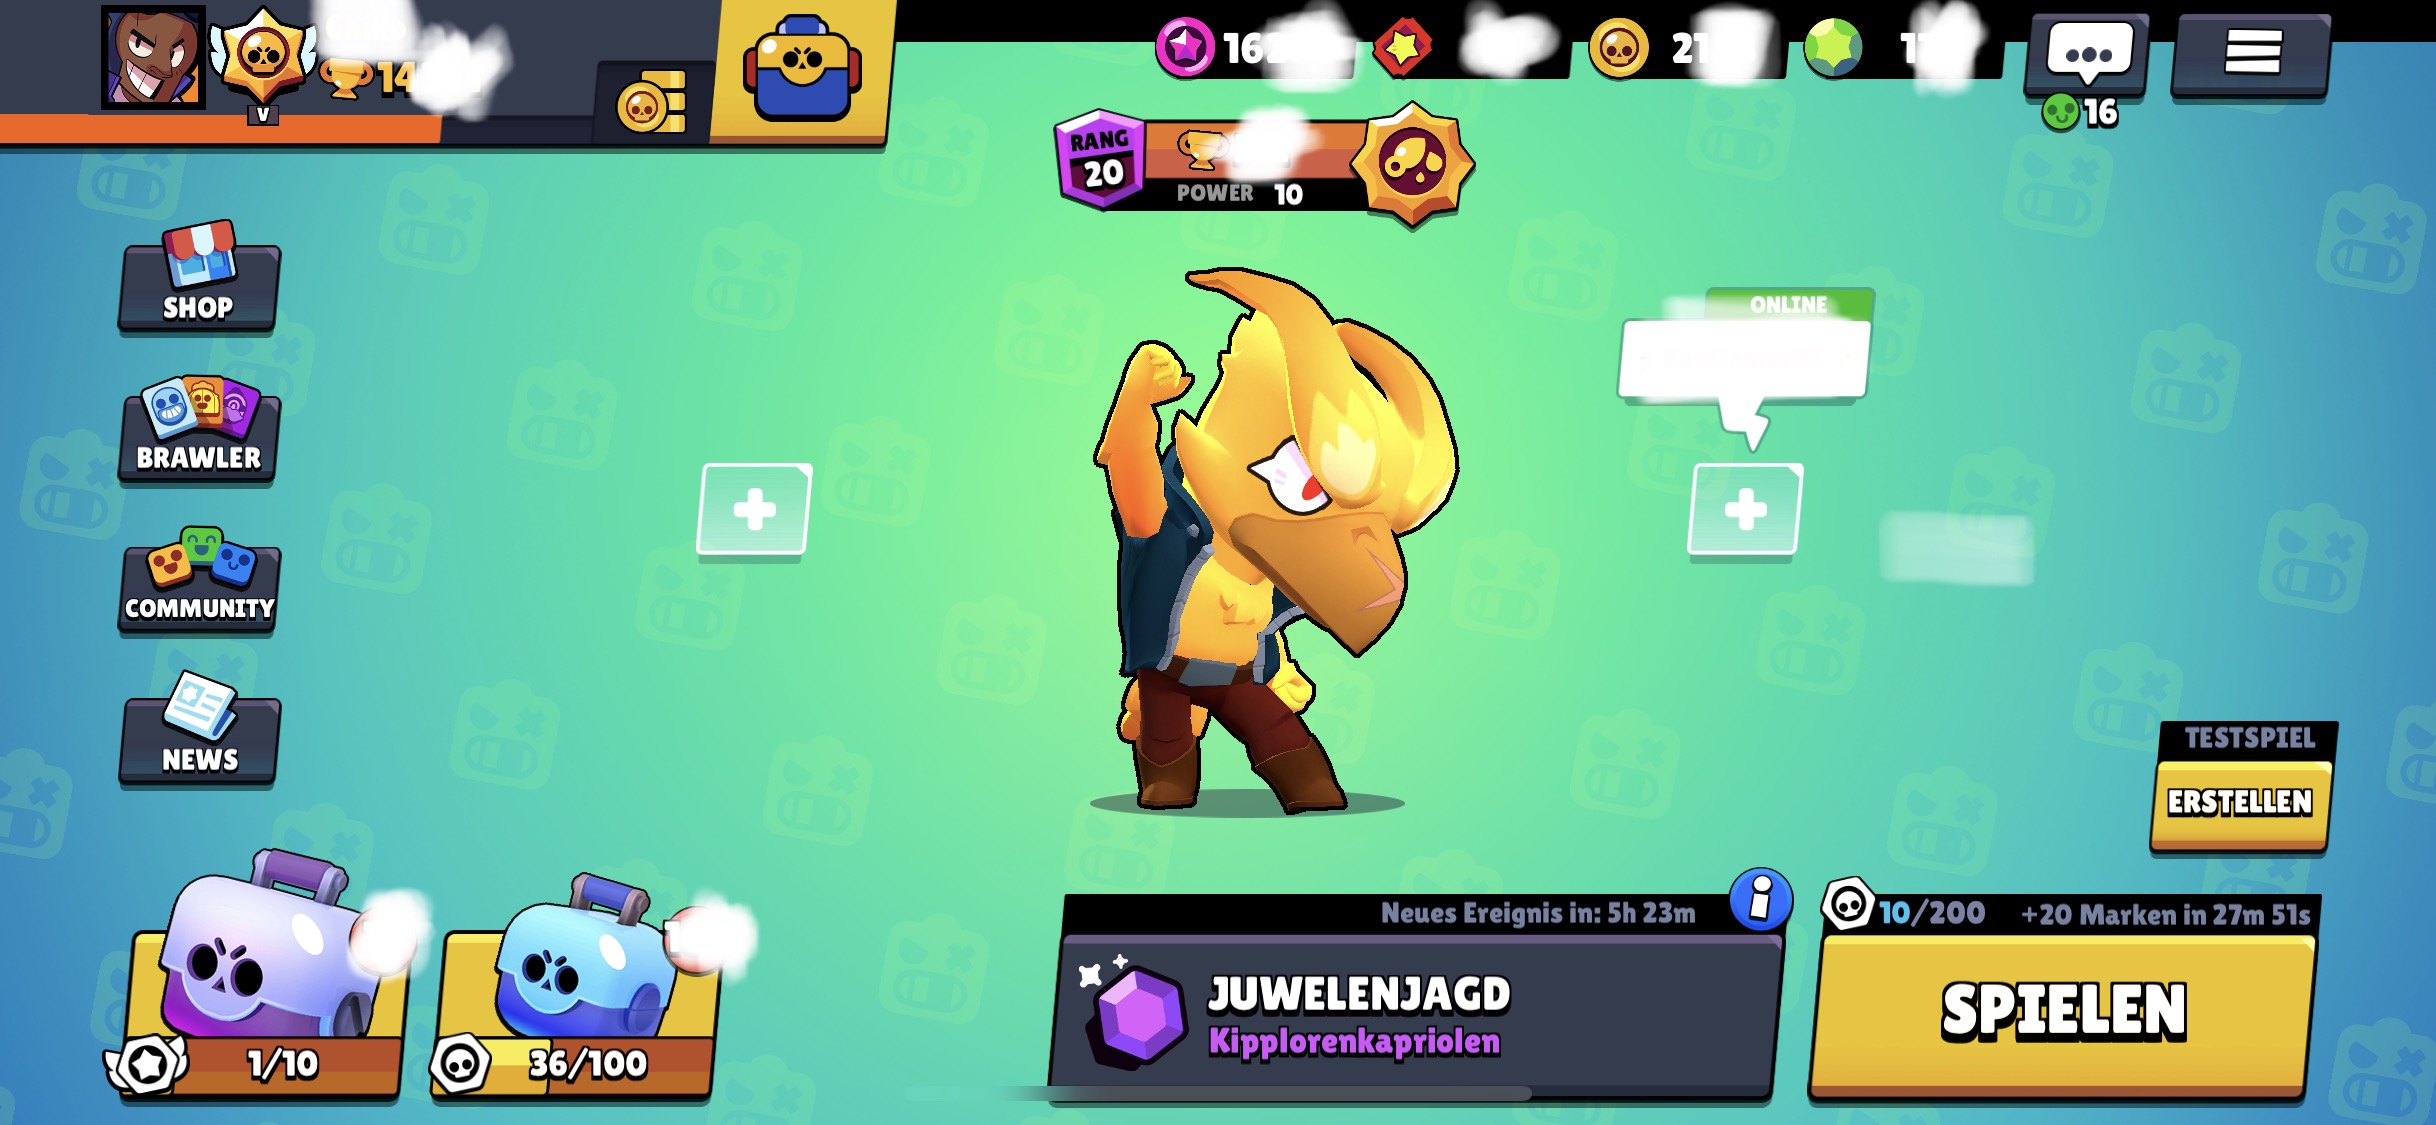 Brawl Stars Max Account With 14800 Trophies And Over 16000 Starpoints Epicnpc Marketplace - brawl stars 100 boxes